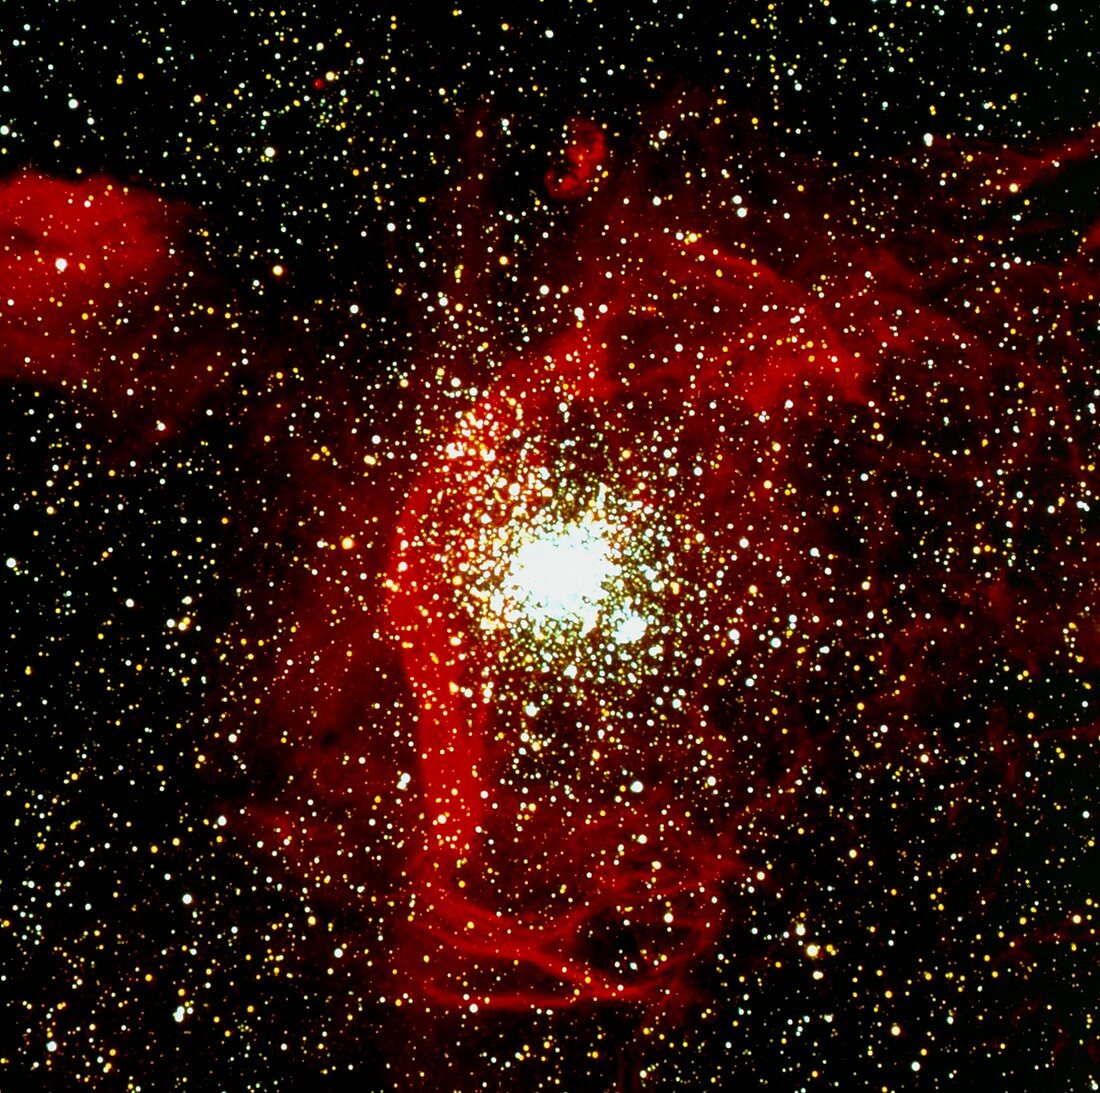 Double star cluster